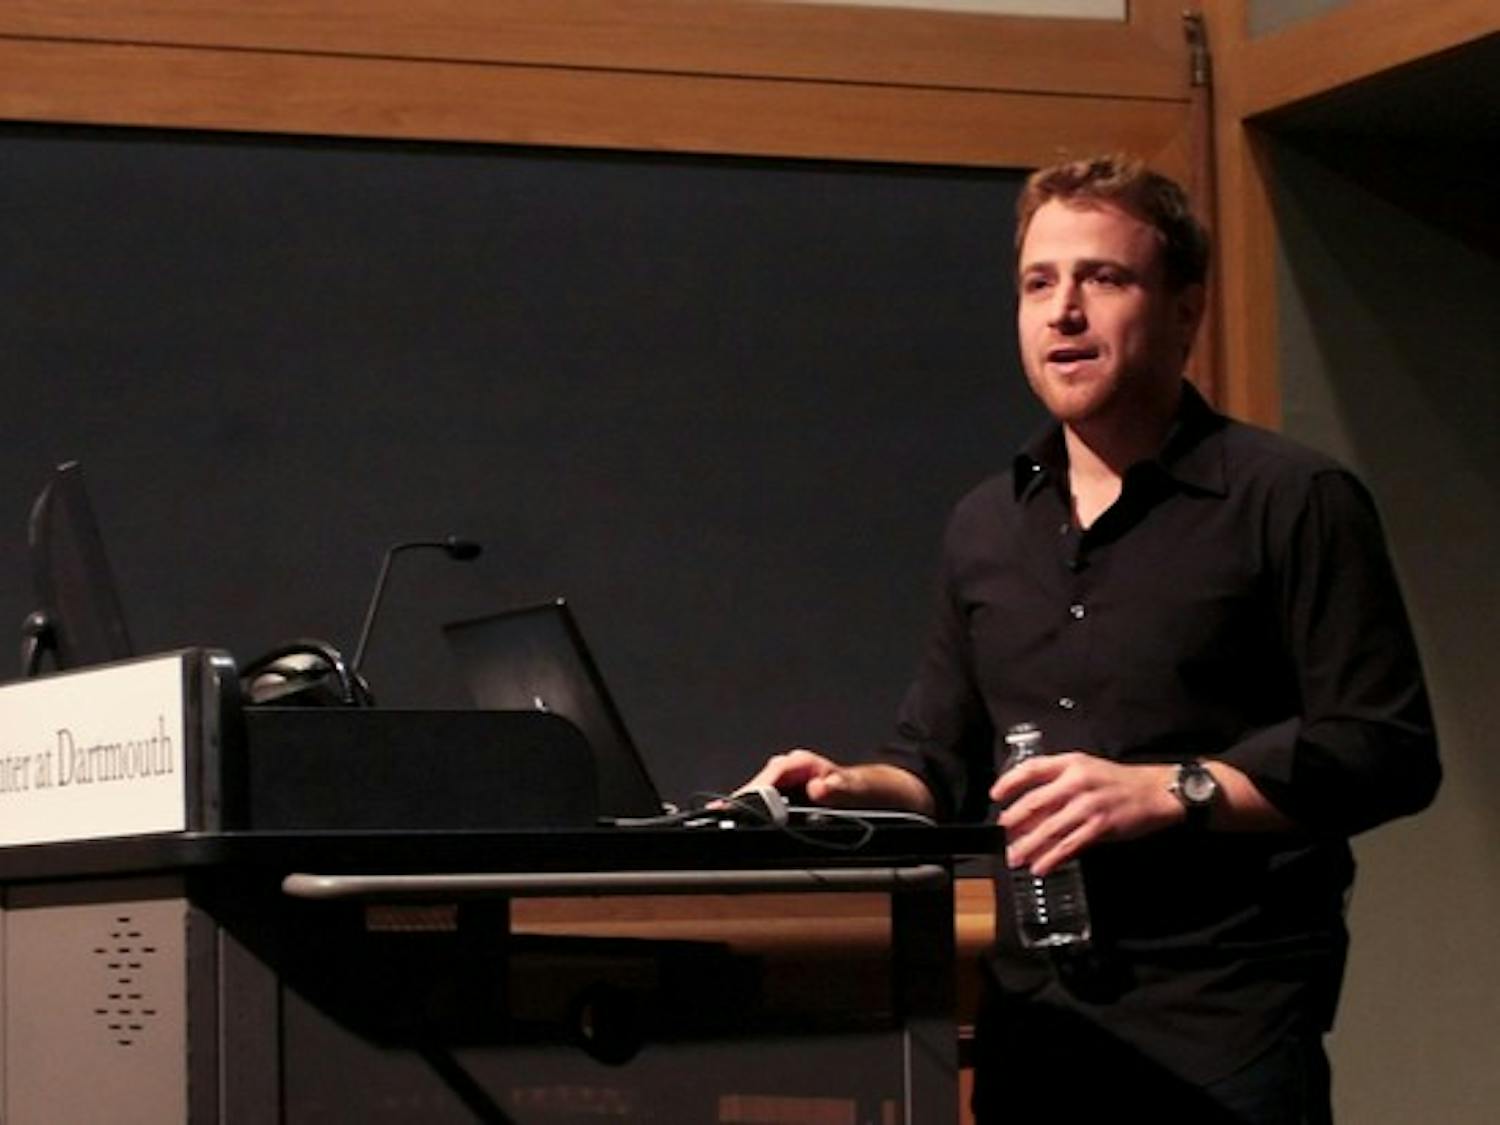 Flickr co-founder Stewart Butterfield discussed the idea behind Flickr in his Wednesday lecture at the Rockefeller Center.